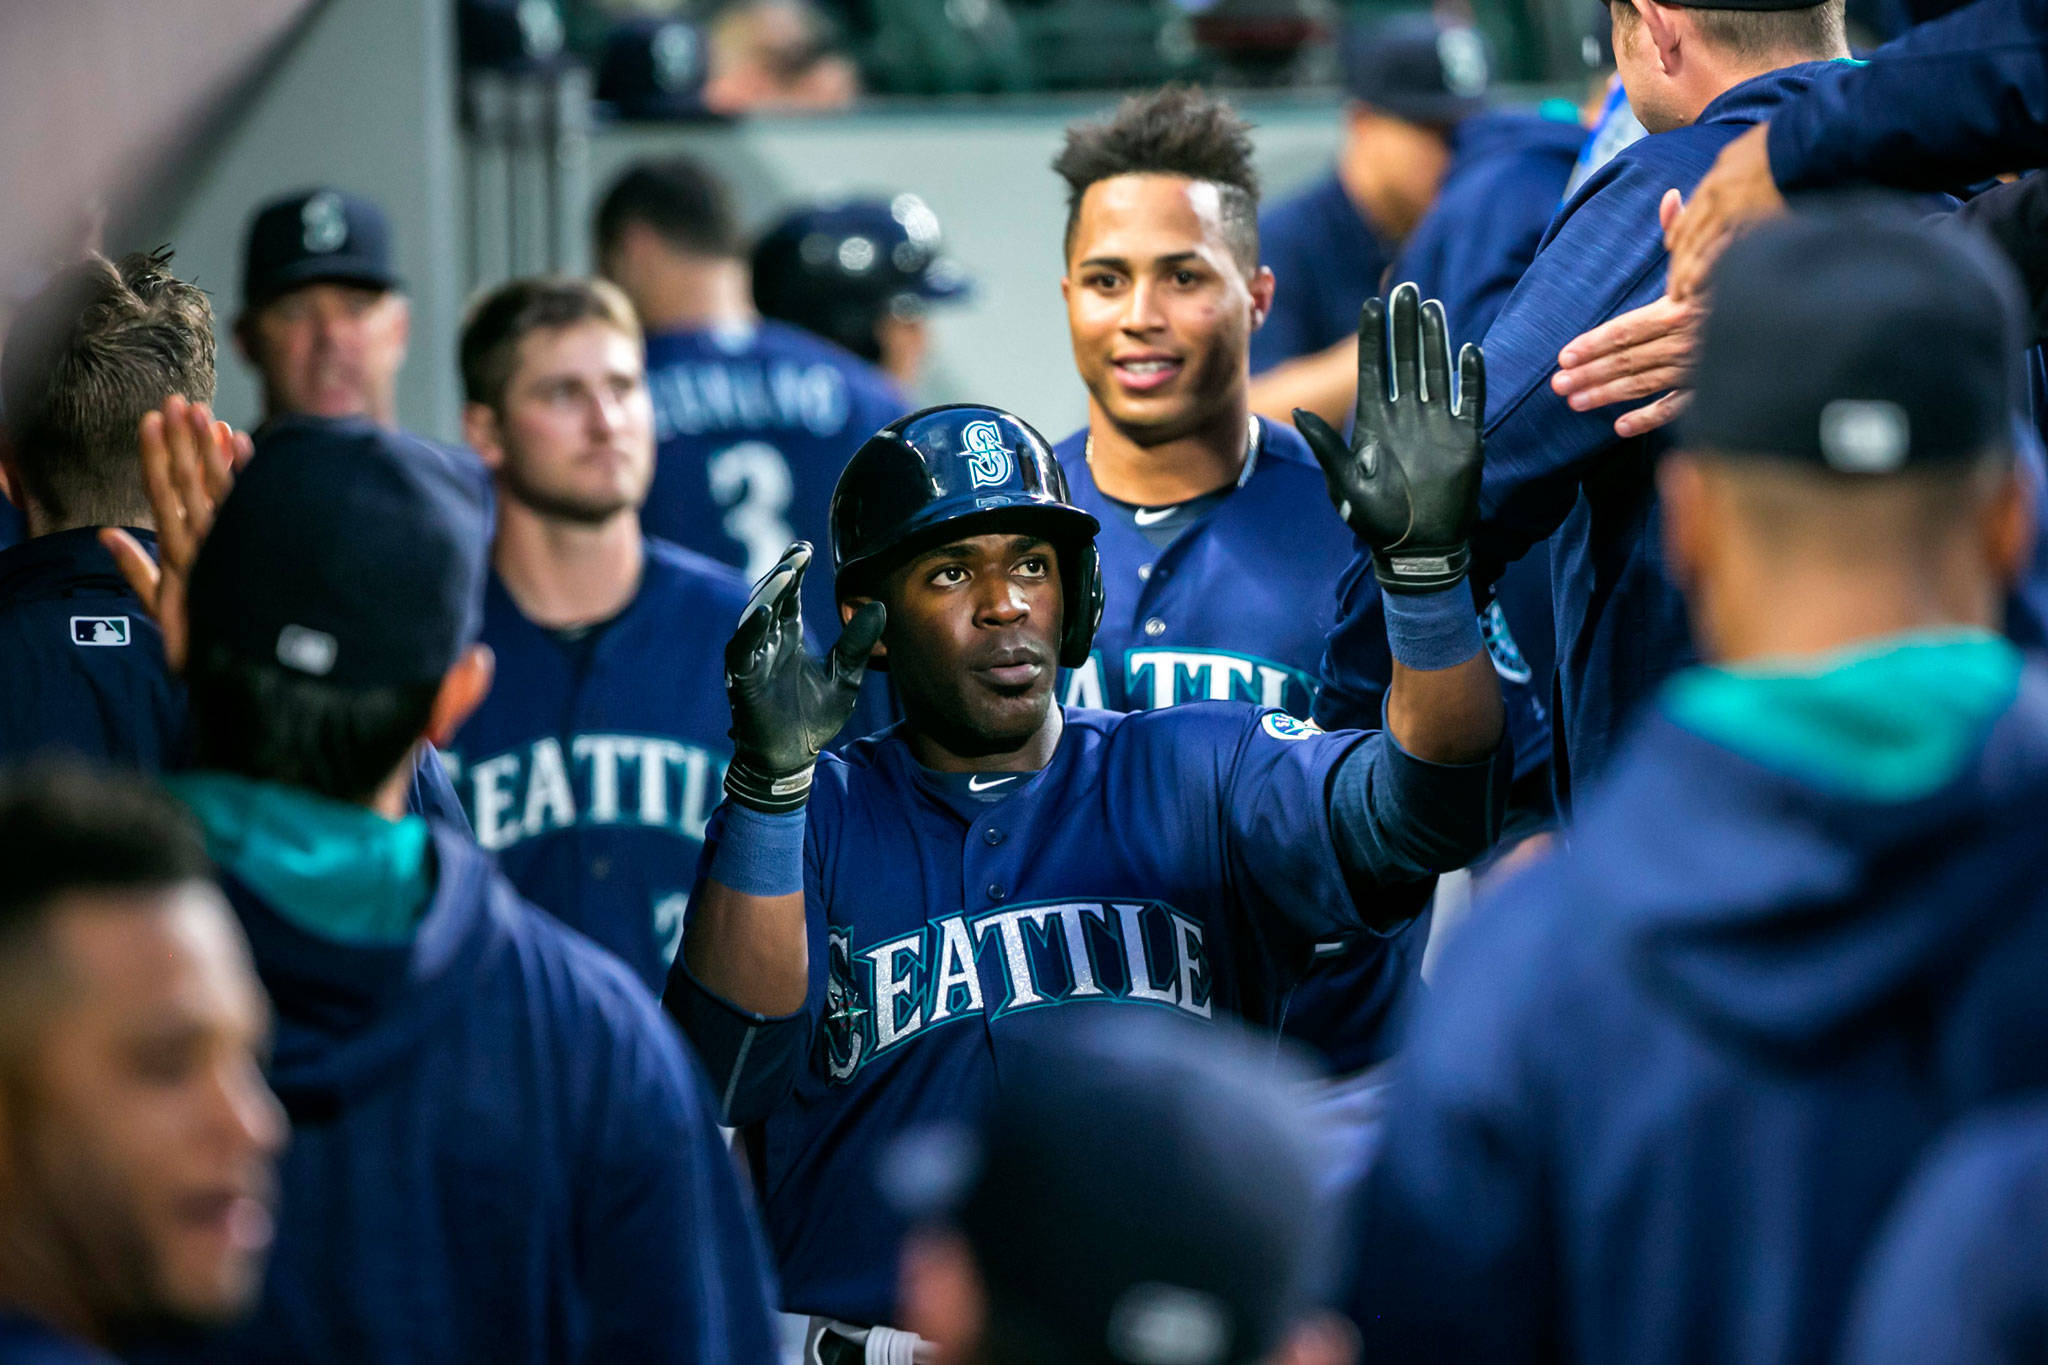 (Bettina Hansen | Seattle Times) Seattle’s Guillermo Heredia, seen here getting congratulated for scoring a run against Texas last season, is more confident entering Spring Training and is aiming for an Opening Day roster spot.